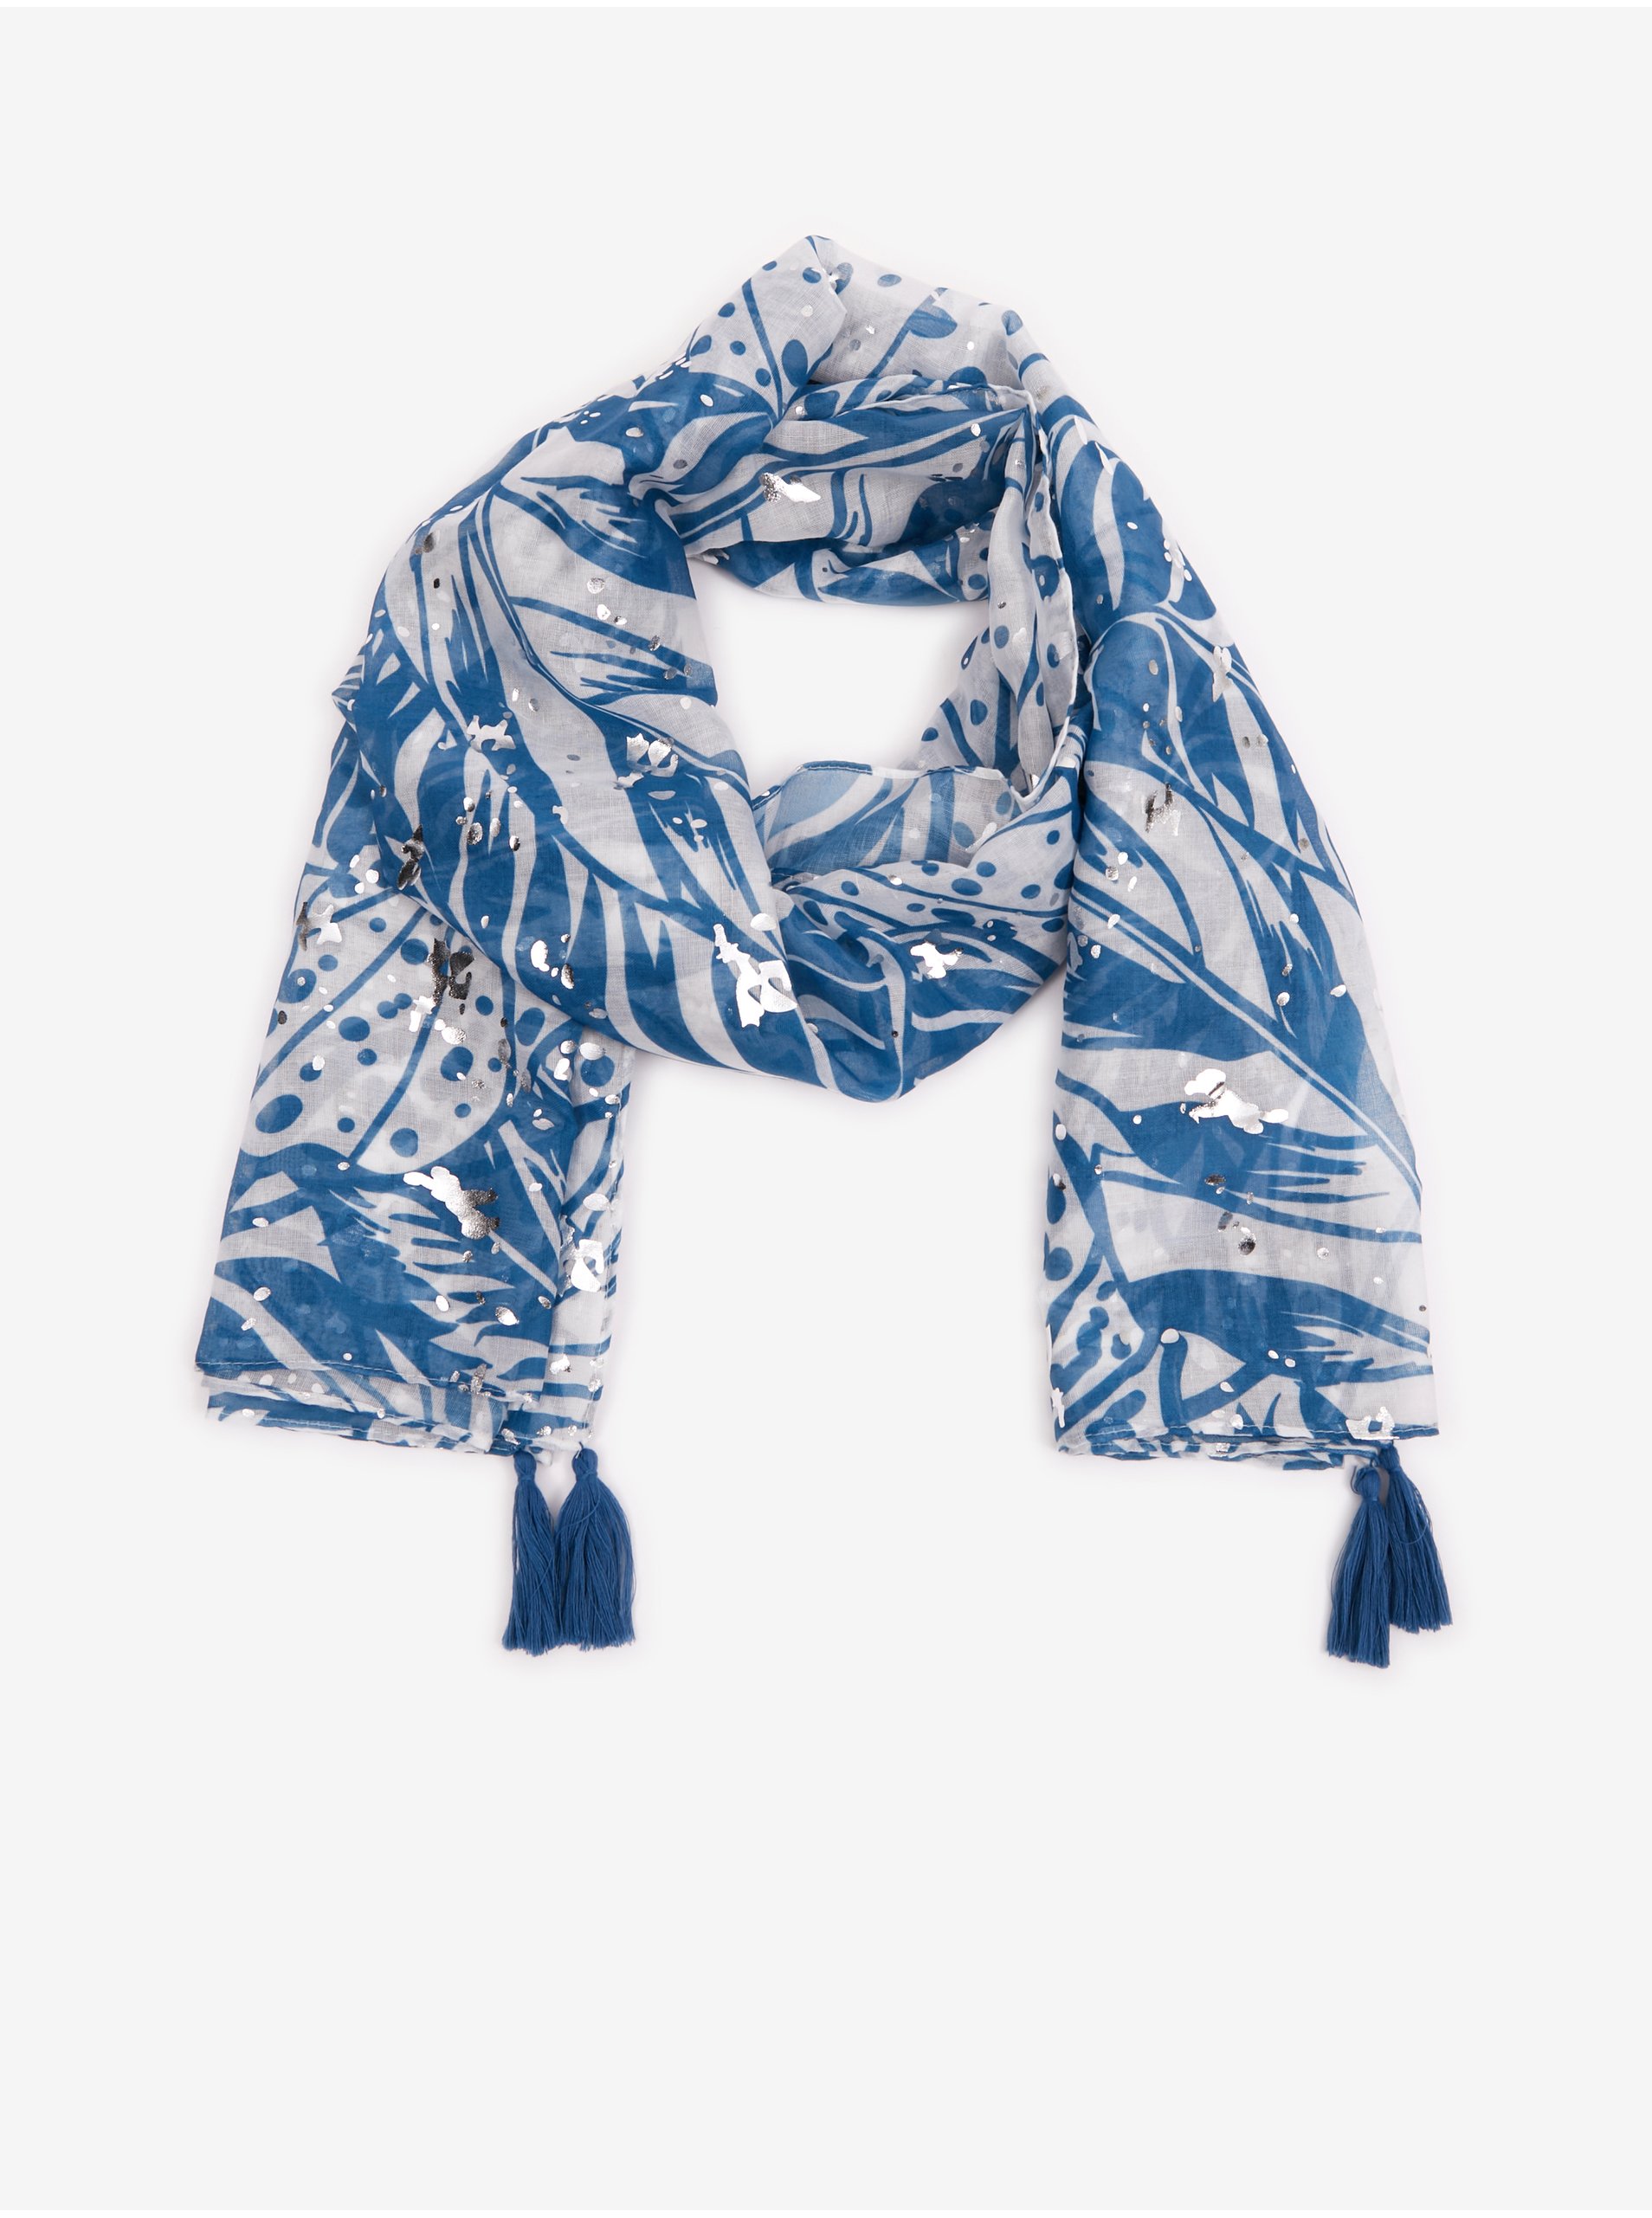 Orsay Blue-White Ladies Patterned Scarf - Women